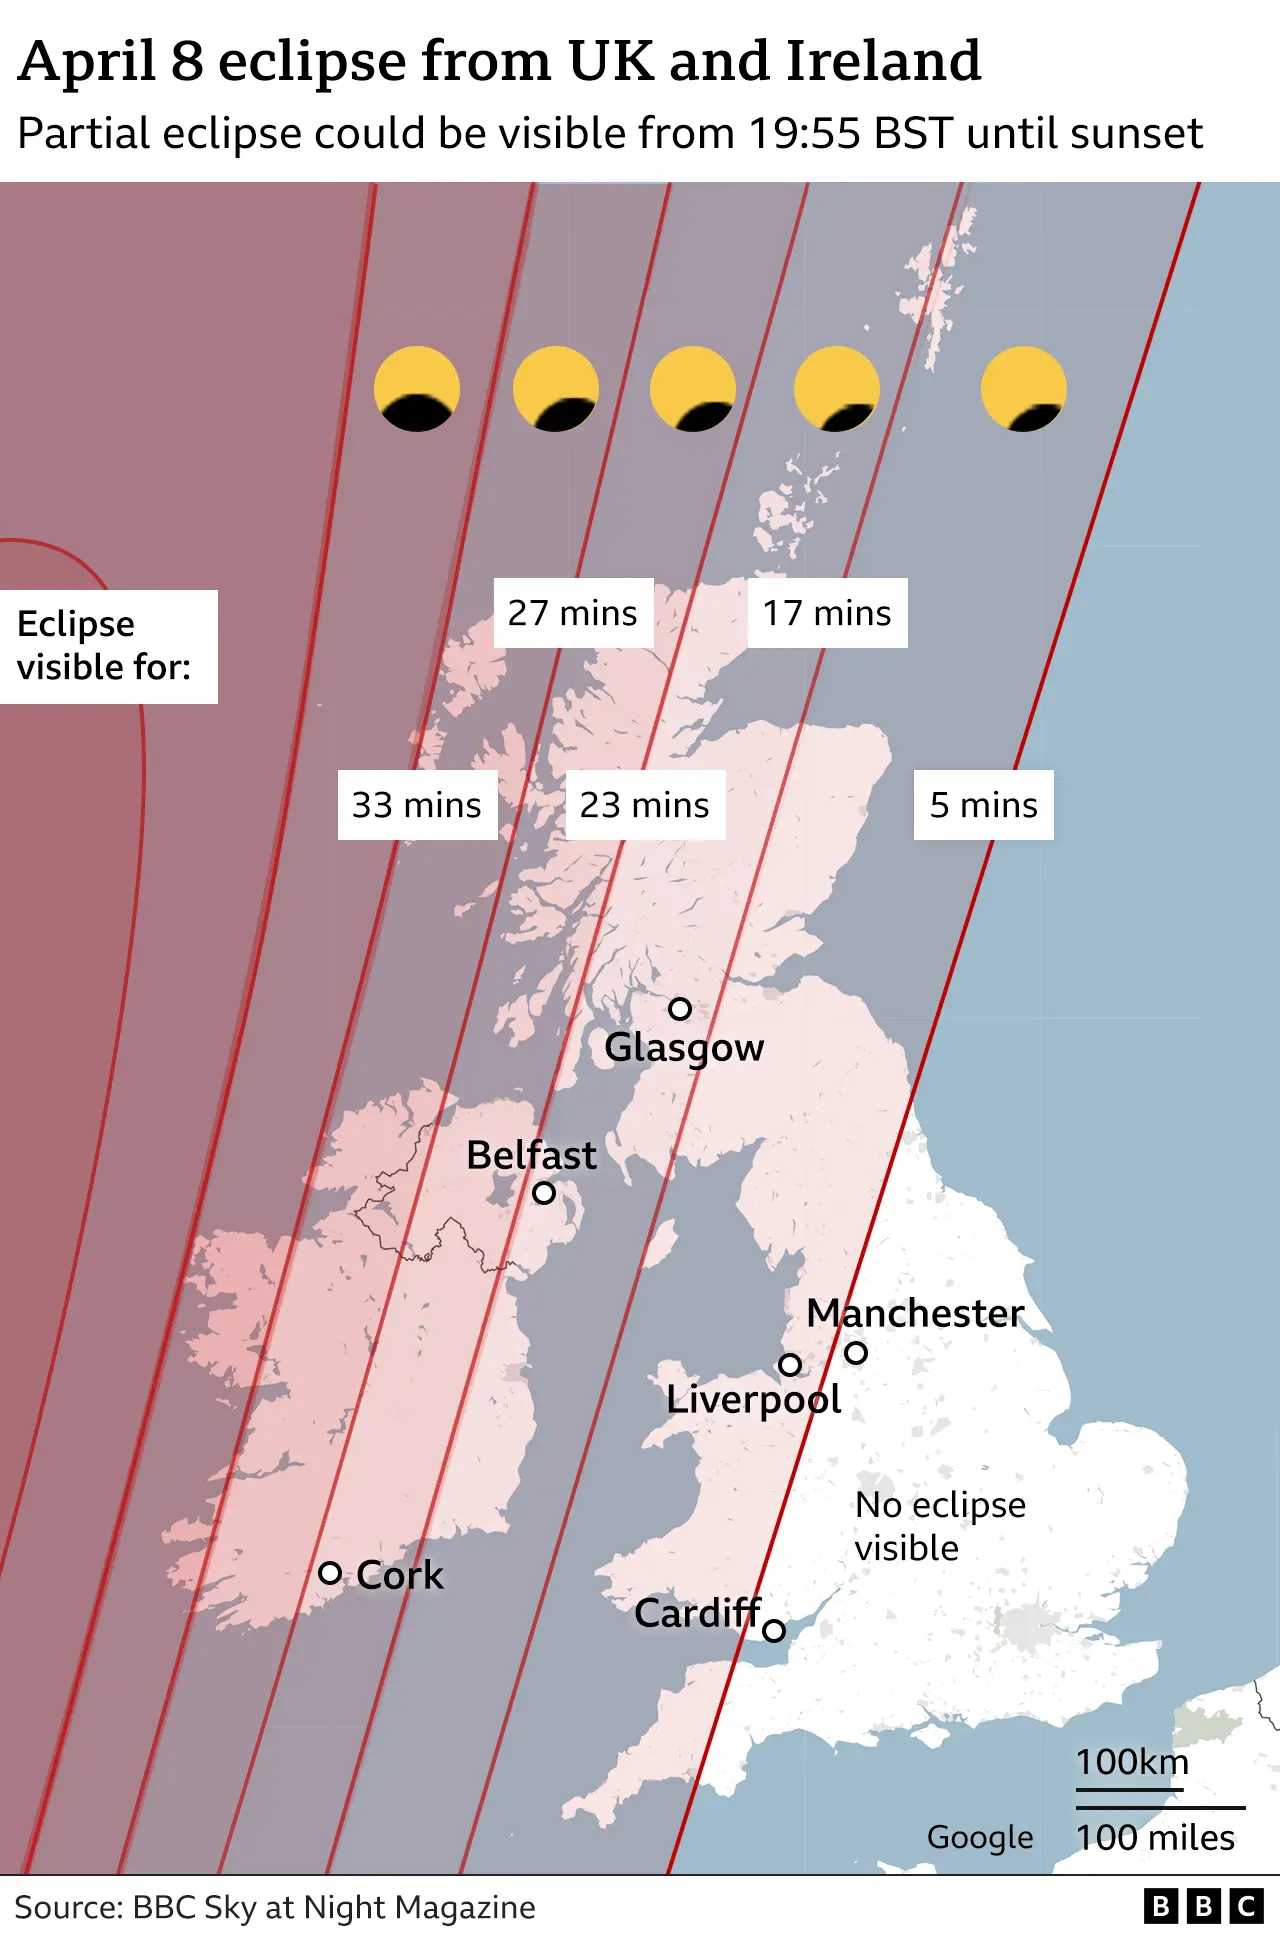 Map of the UK showing visibility of the eclipse in different cities